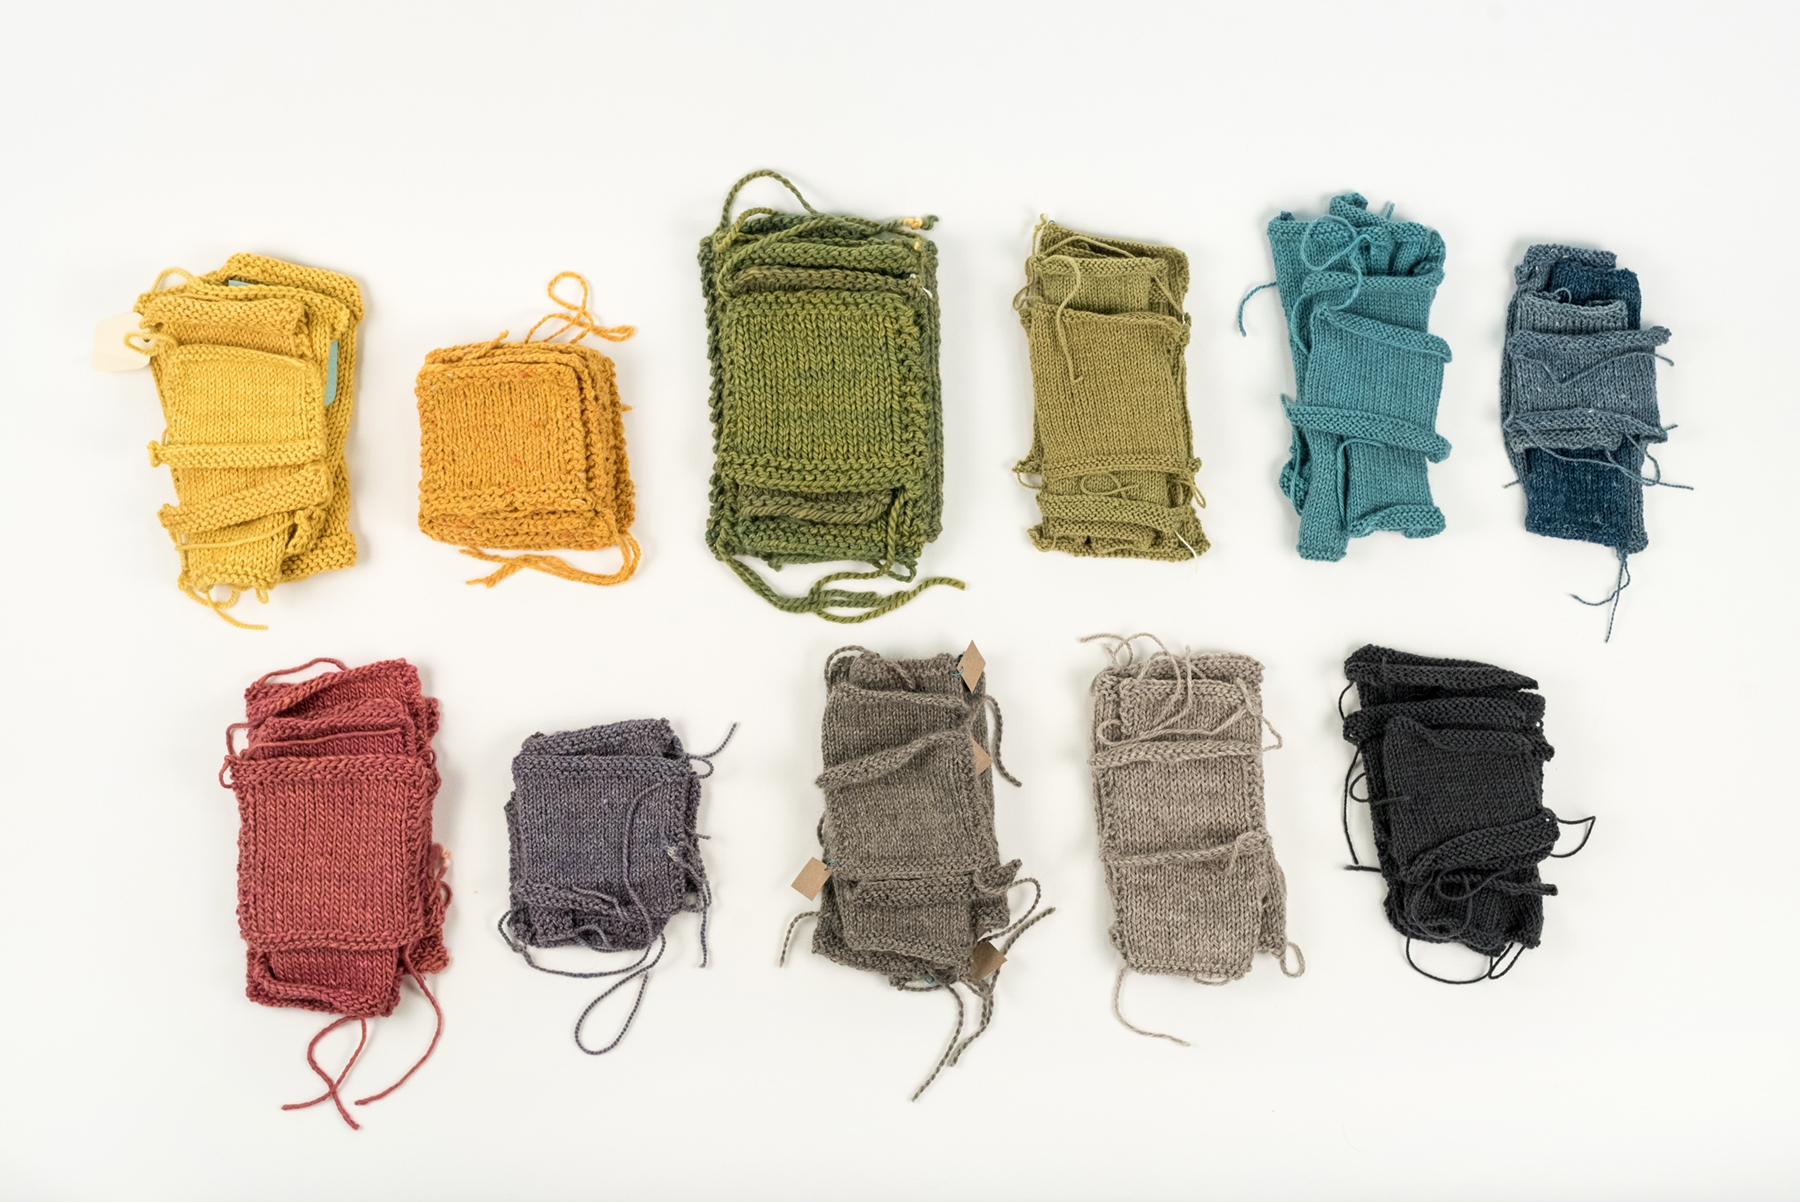 Top row, l to r: Canopy Worsted, Arranmore, Tundra, Canopy Fingering, Road to China Light, Meadow. Bottom row, l to r: Terra, Acadia, Knightsbridge, Cumbria, Cumbria Fingering.